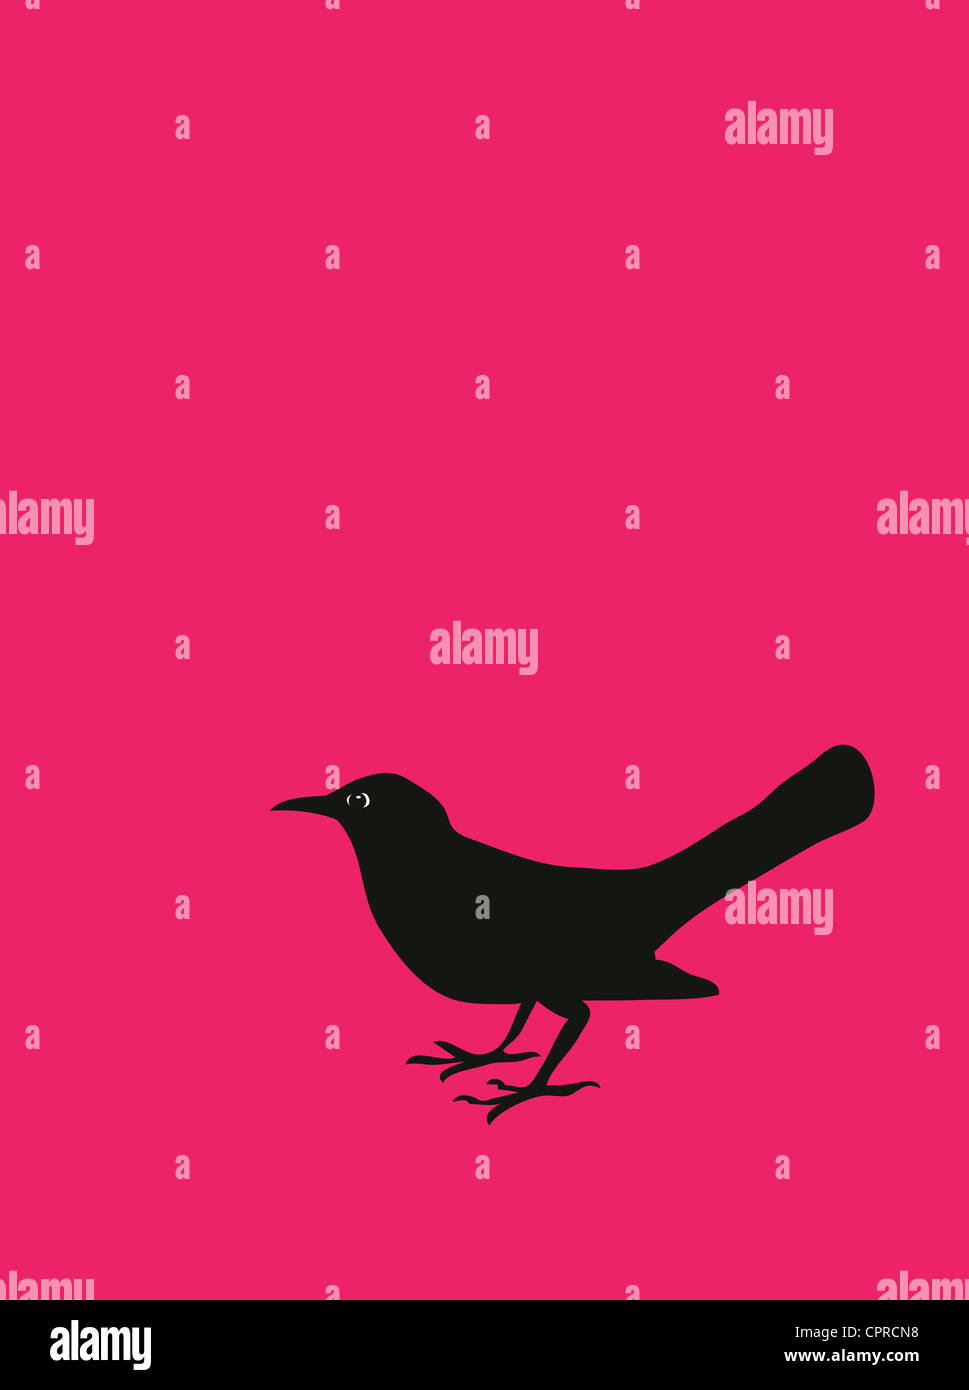 One blackbird on a pink background. Stock Photo